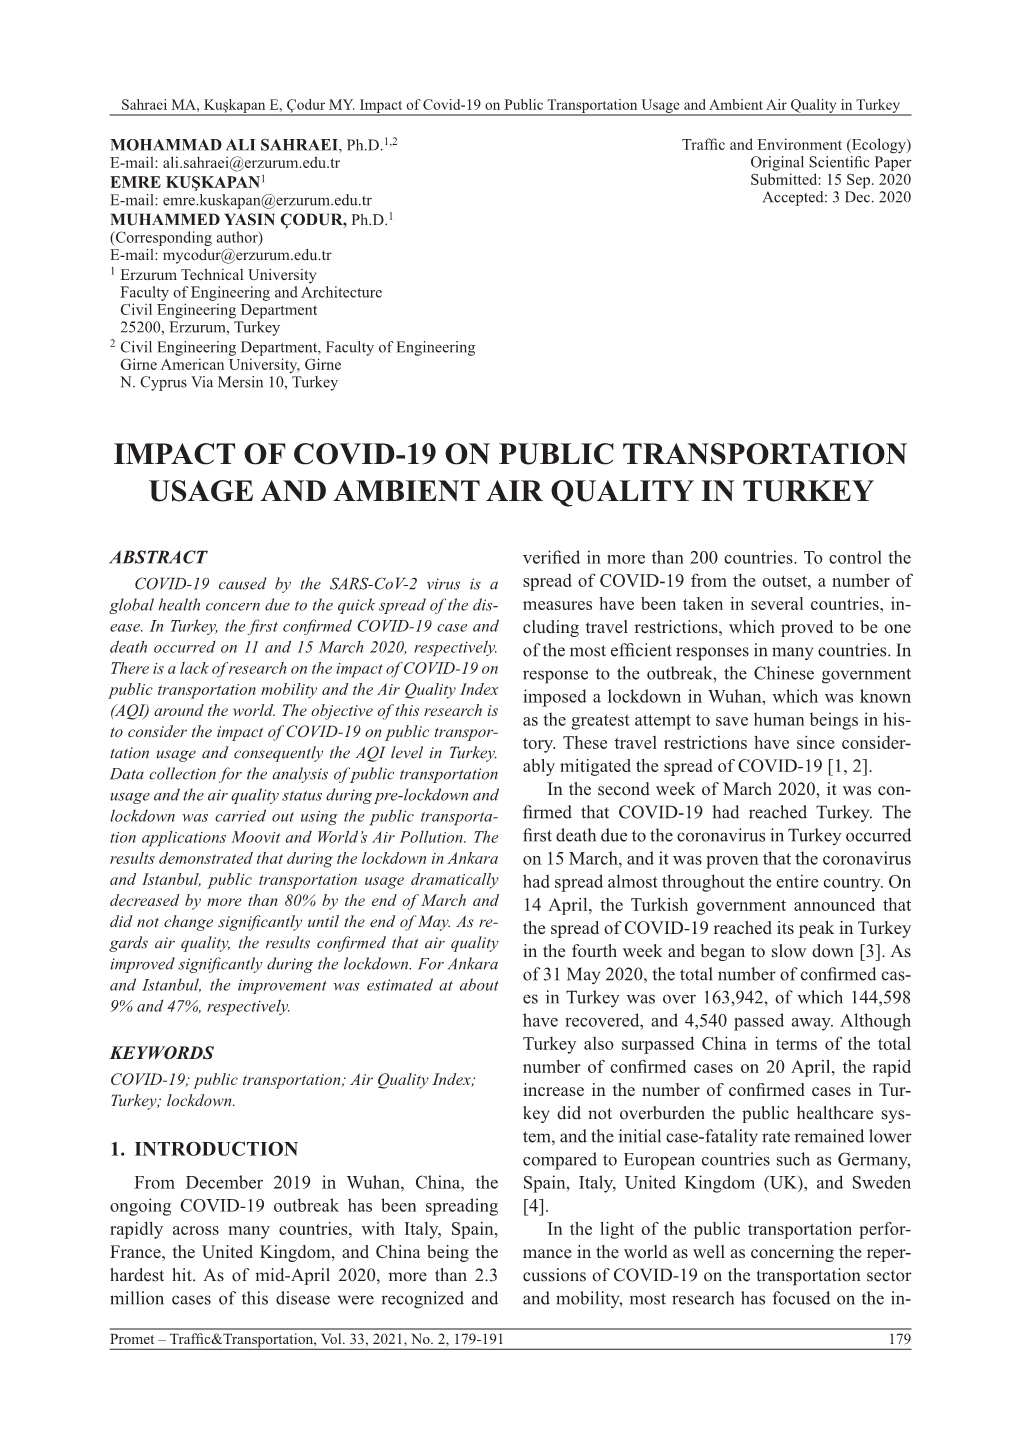 Impact of Covid-19 on Public Transportation Usage and Ambient Air Quality in Turkey